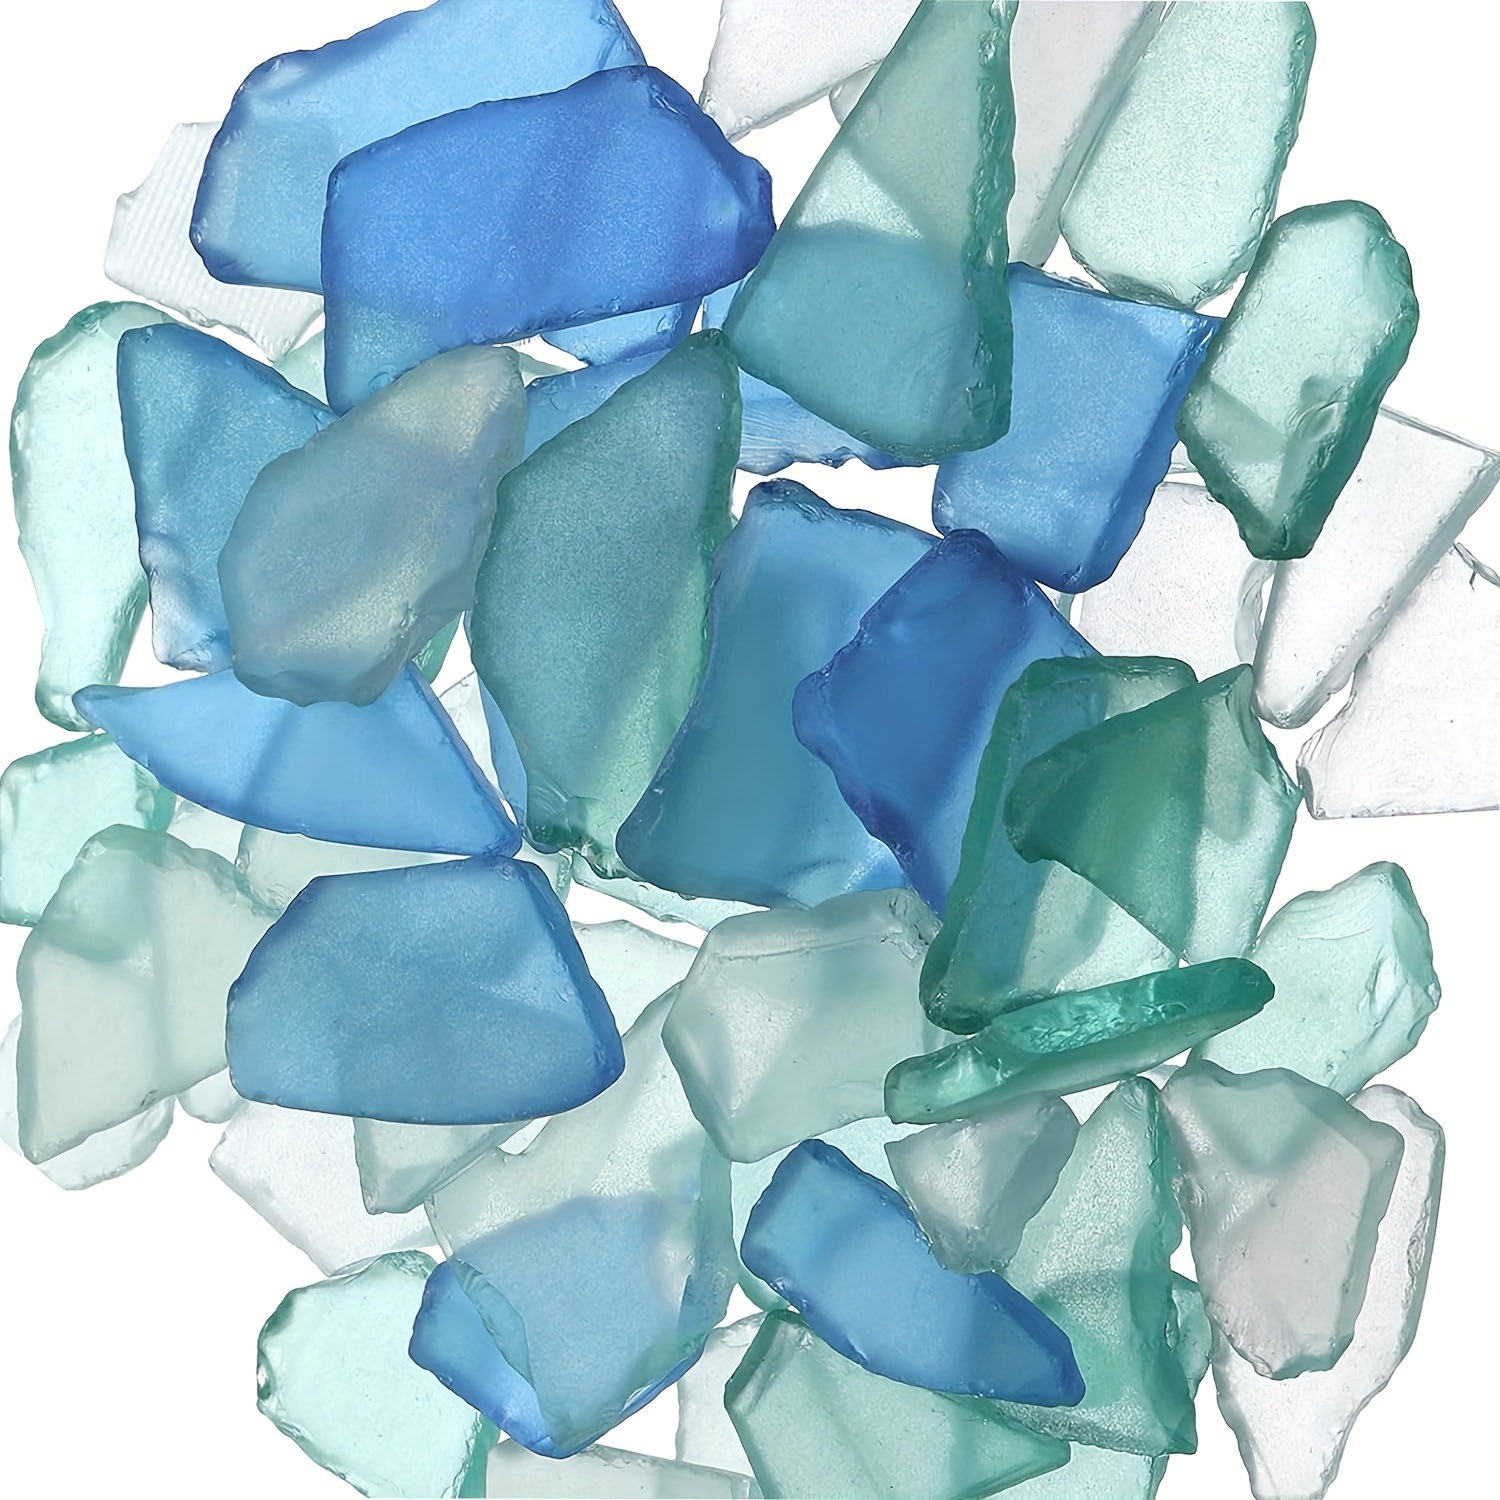 

8.82oz (250g) Sea Glass Ornament, For Crafts Sea Glass Pieces Decor Flat Frosted Vase Filler Crushed Beach Wedding Party Decor Home Aquarium Decor Blue White Green